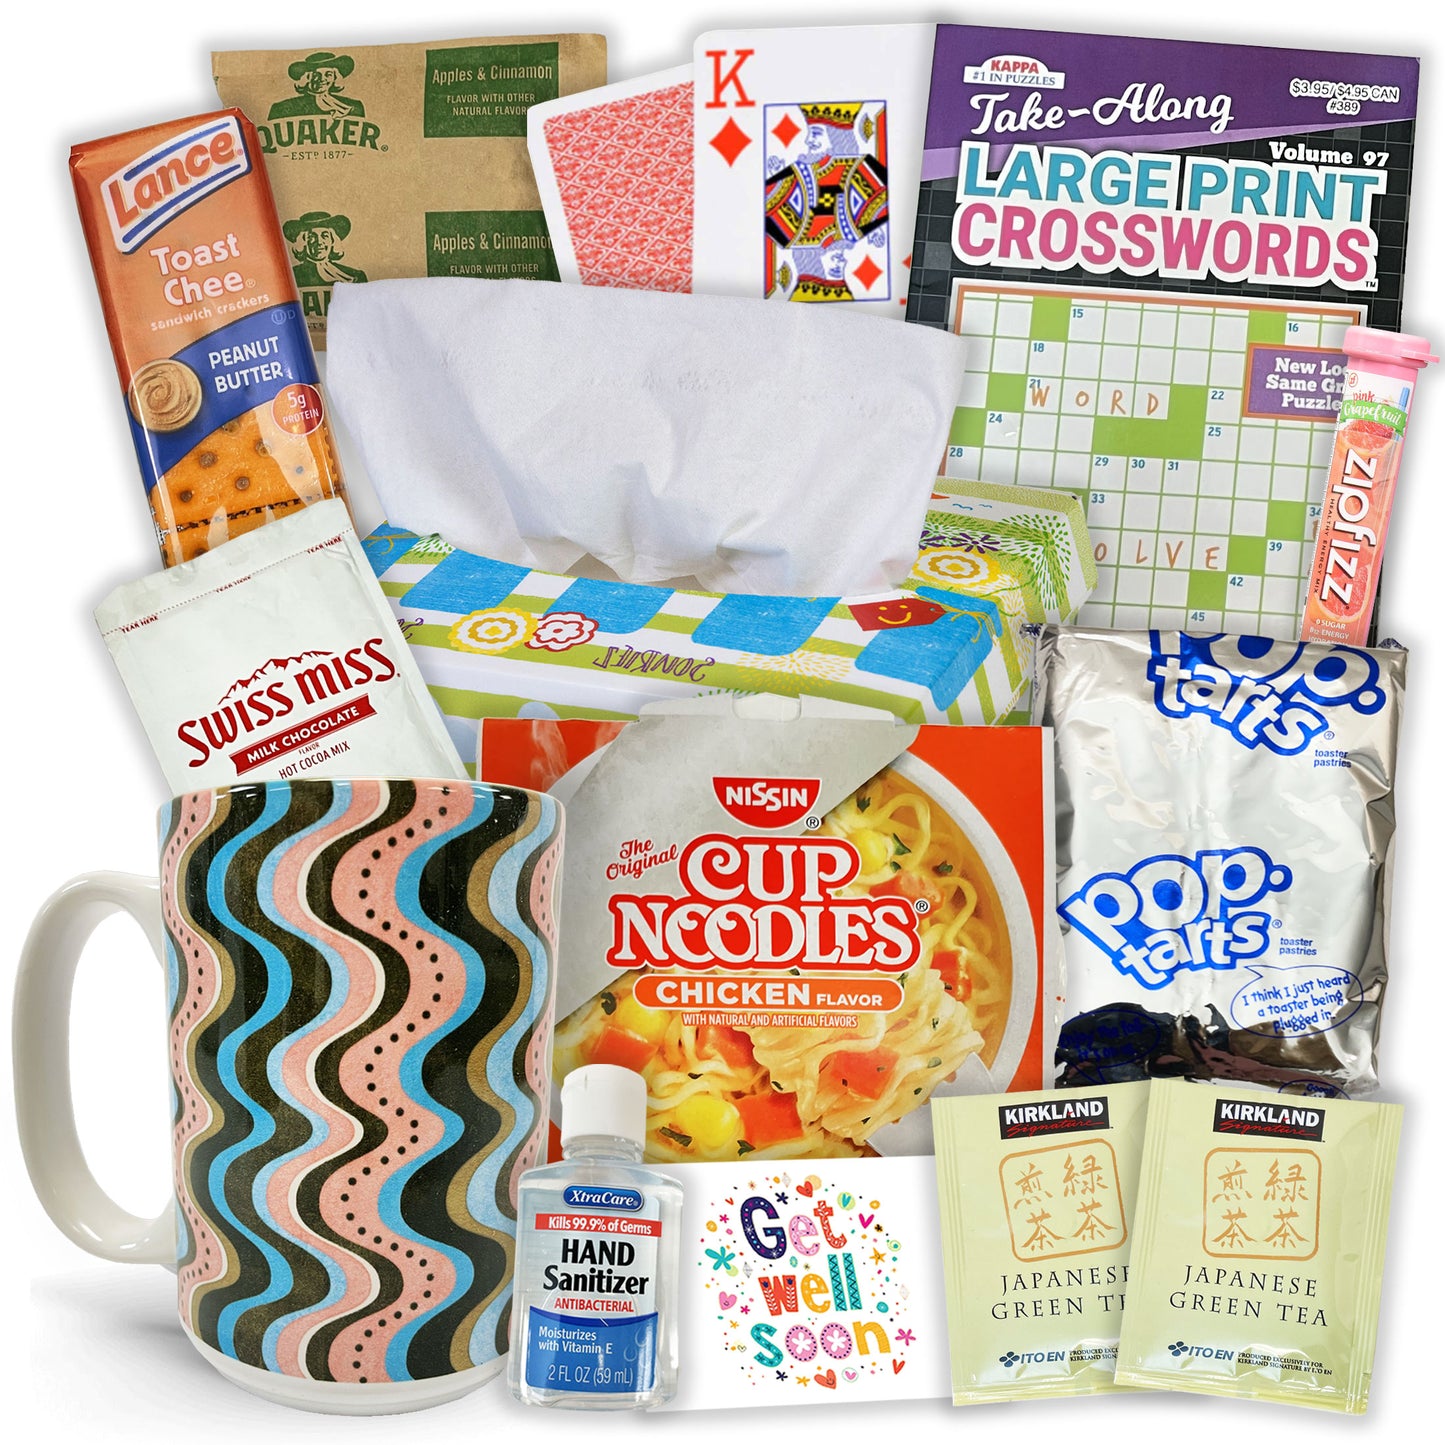 Get-well corporate gifts, CAREBOX